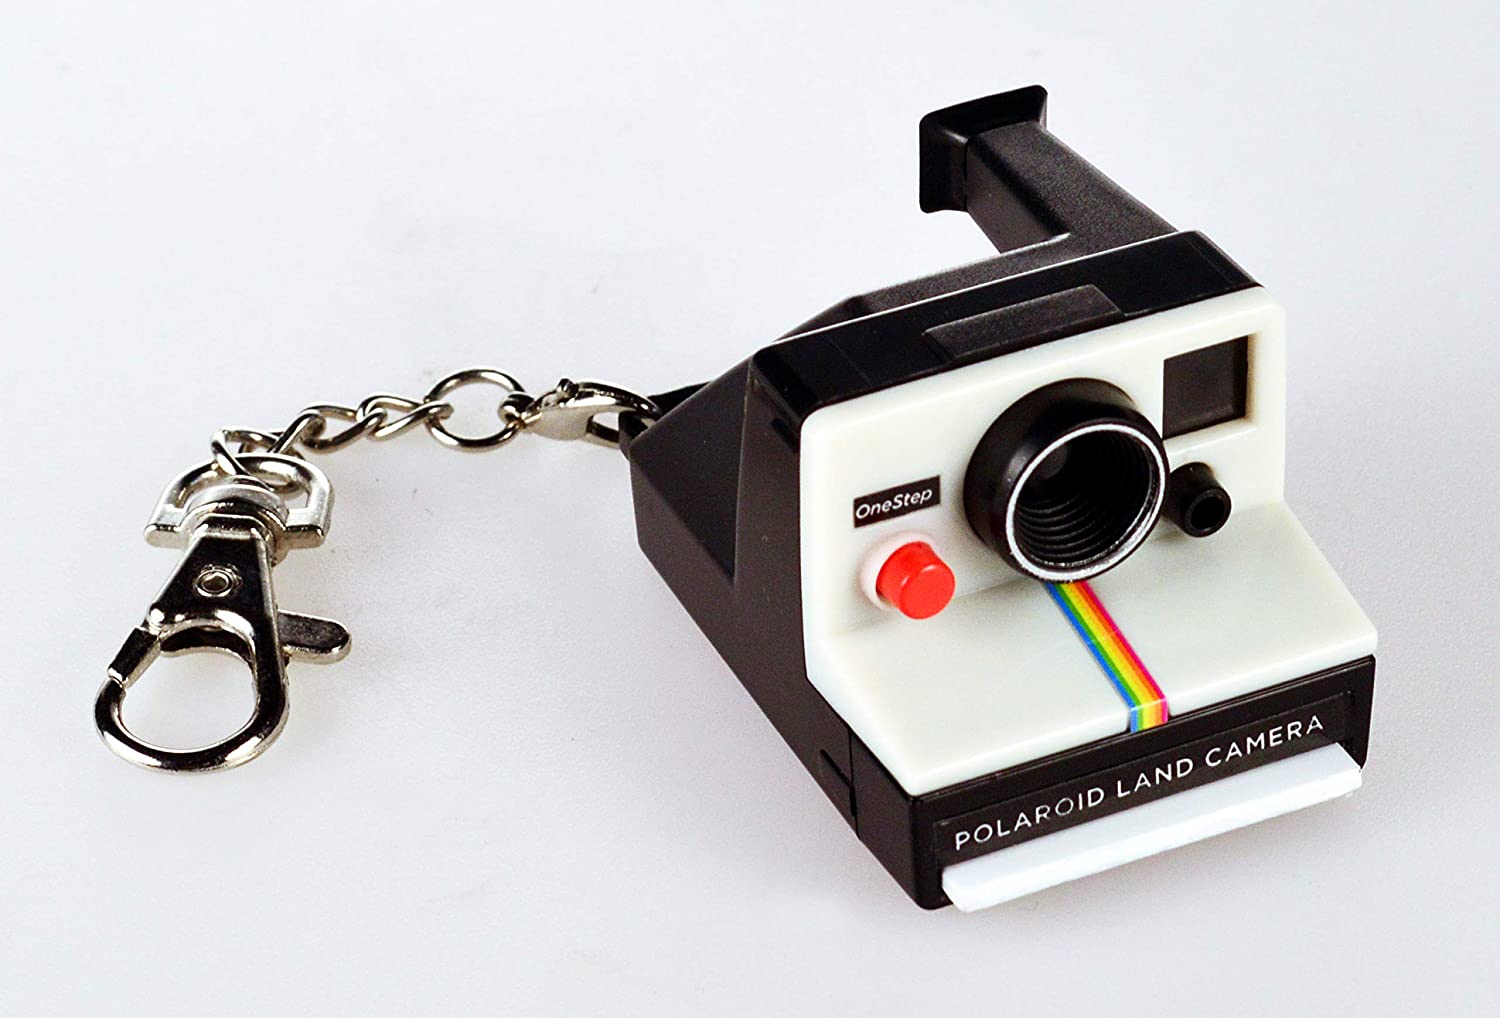 30 cool keychains you didn't know existed | Unique & fun keychains